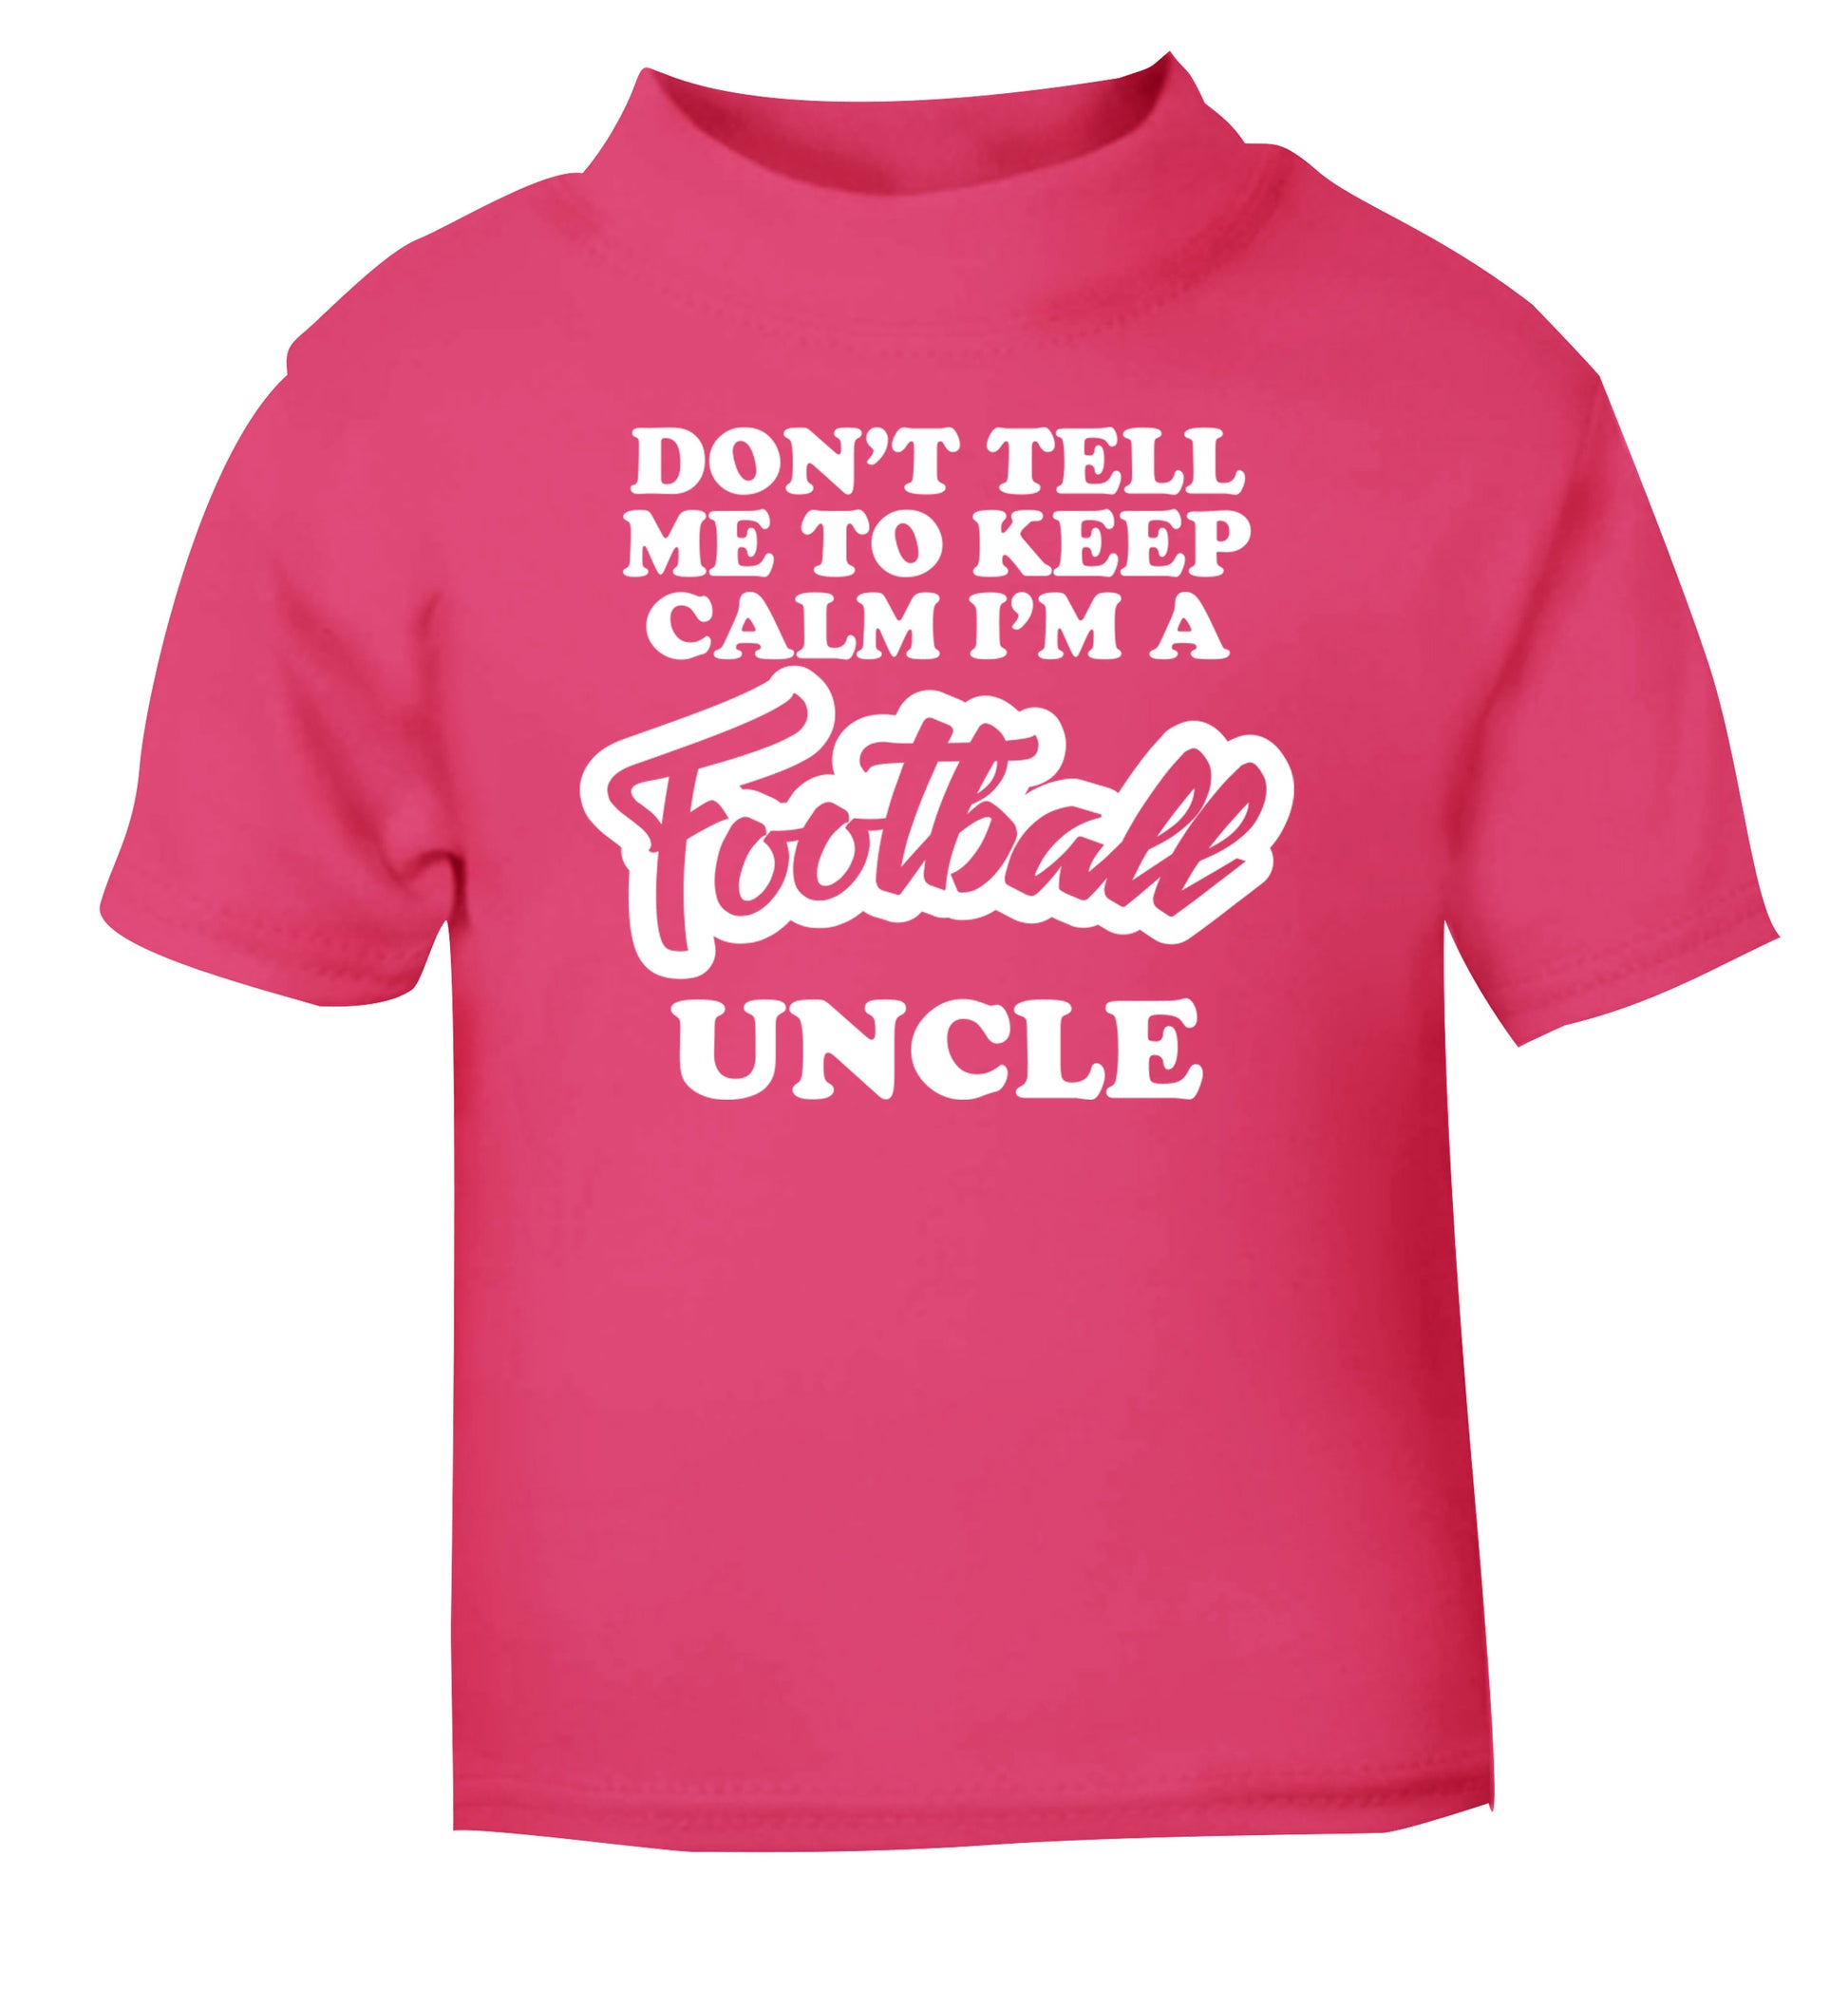 Don't tell me to keep calm I'm a football uncle pink Baby Toddler Tshirt 2 Years